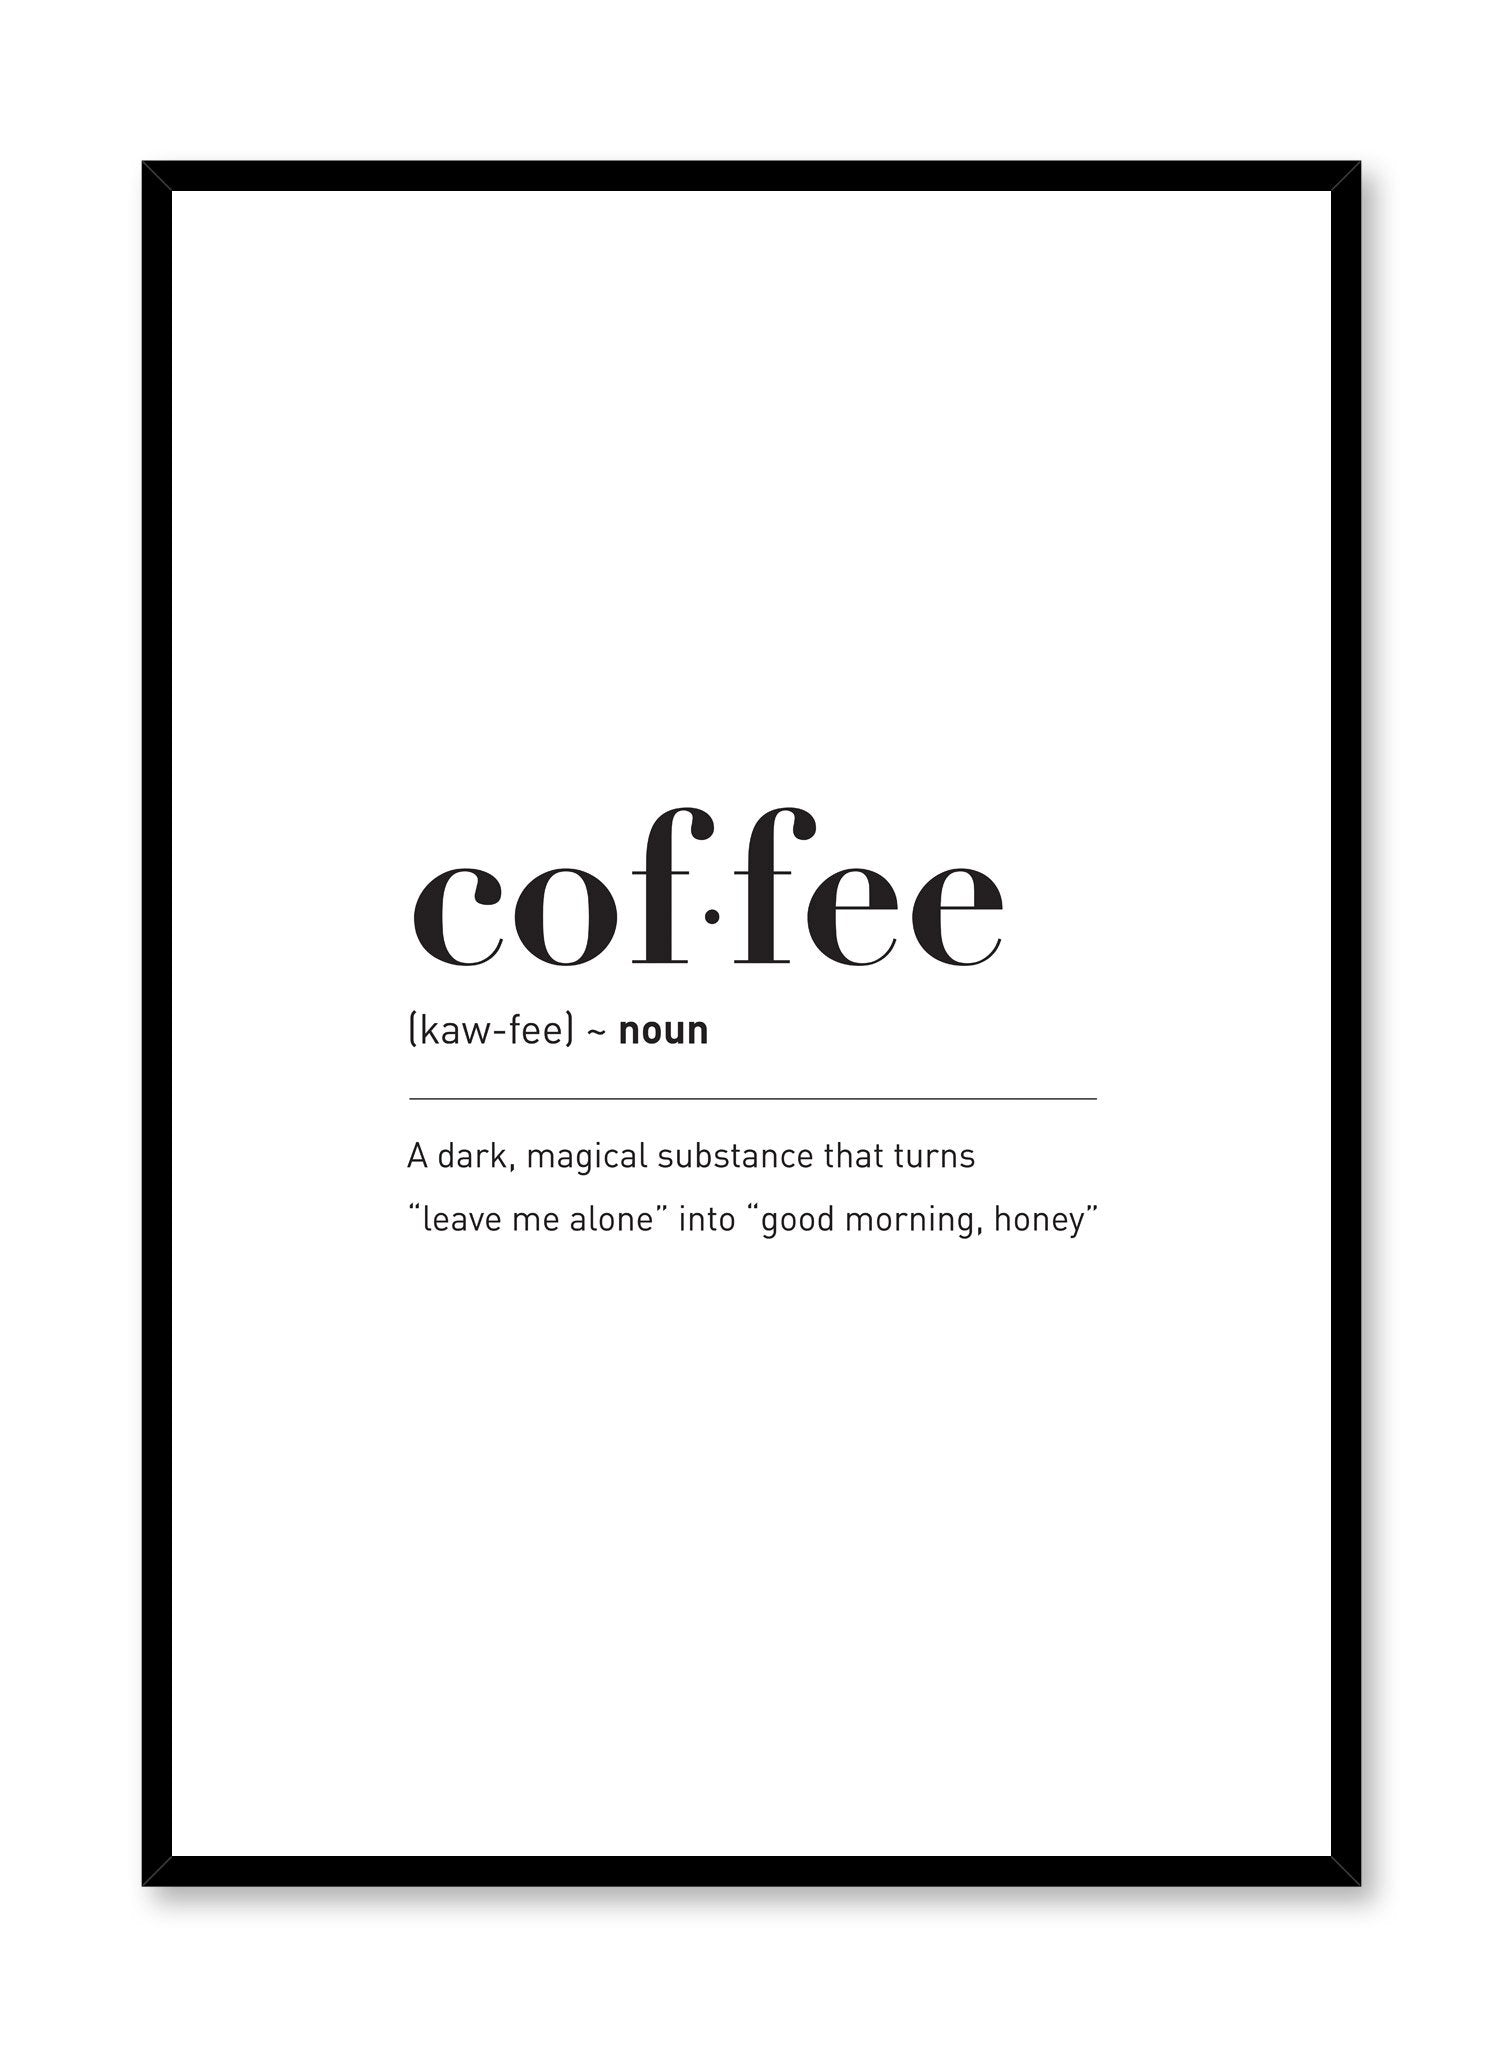 Minimalist poster by Opposite Wall with Coffee typography